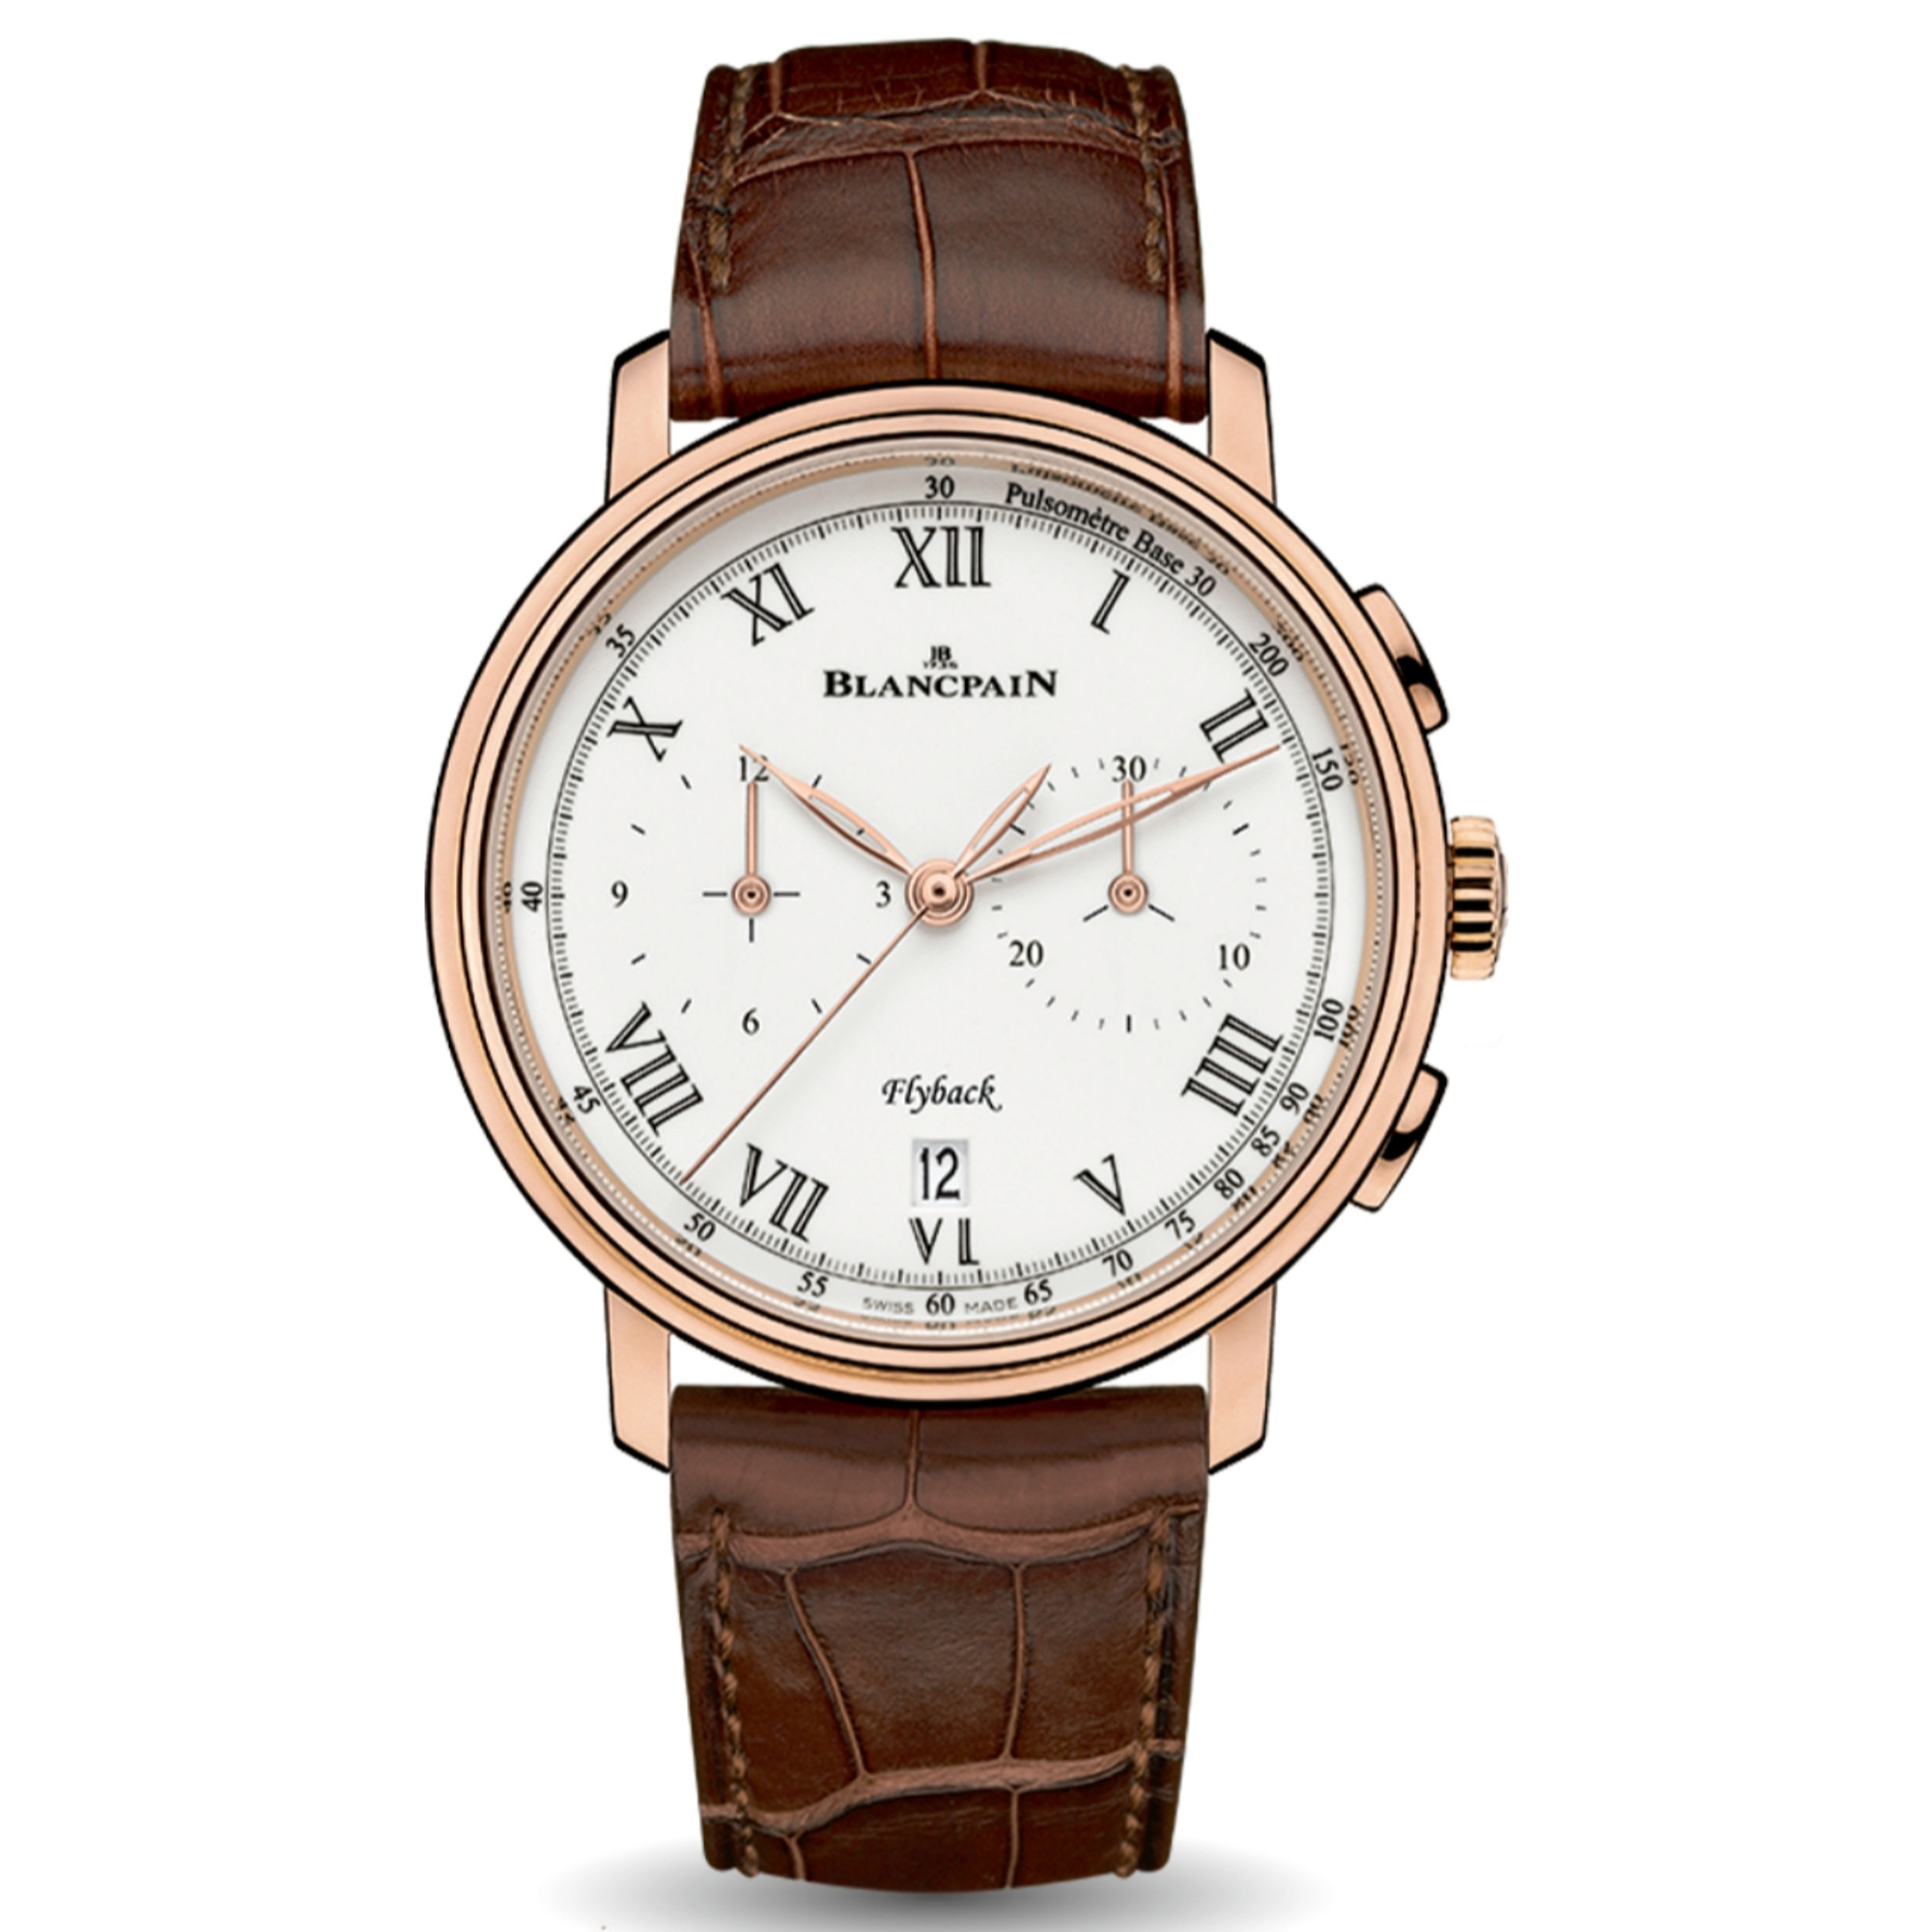 New Blancpain Villeret Chronographe Flyback Pulsomètre White Dial Rose Gold on Strap